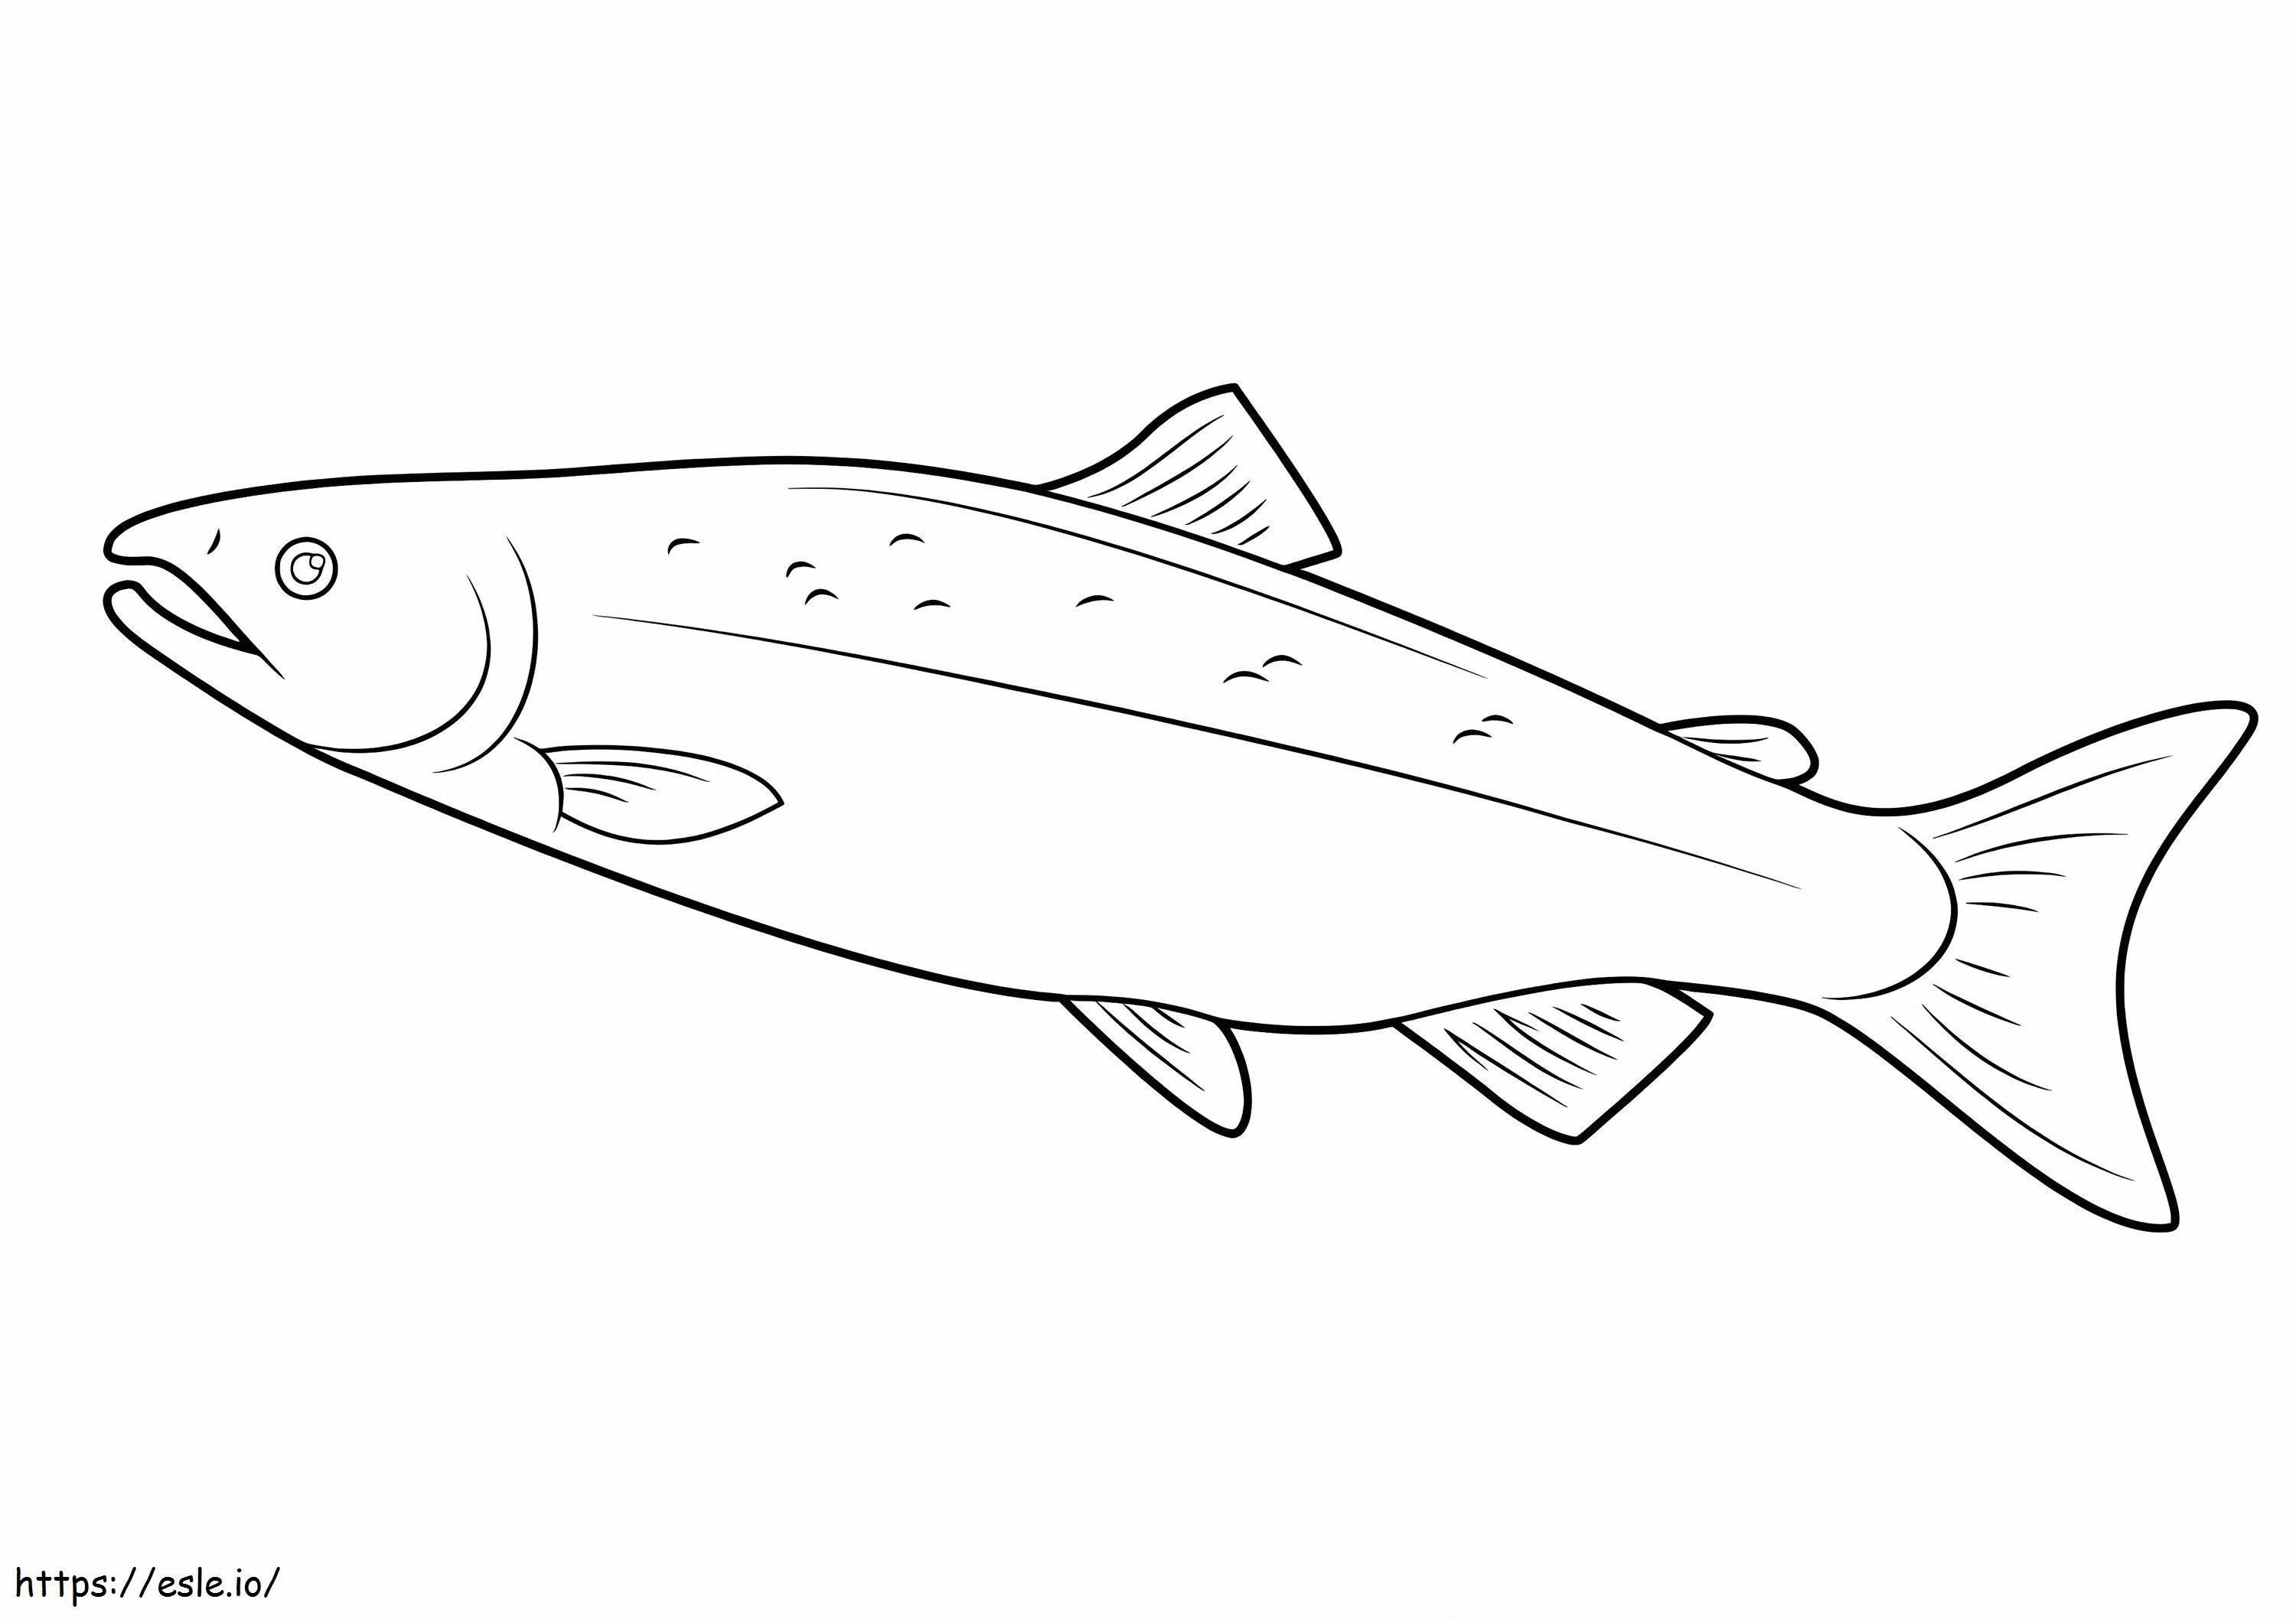 A Salmon coloring page